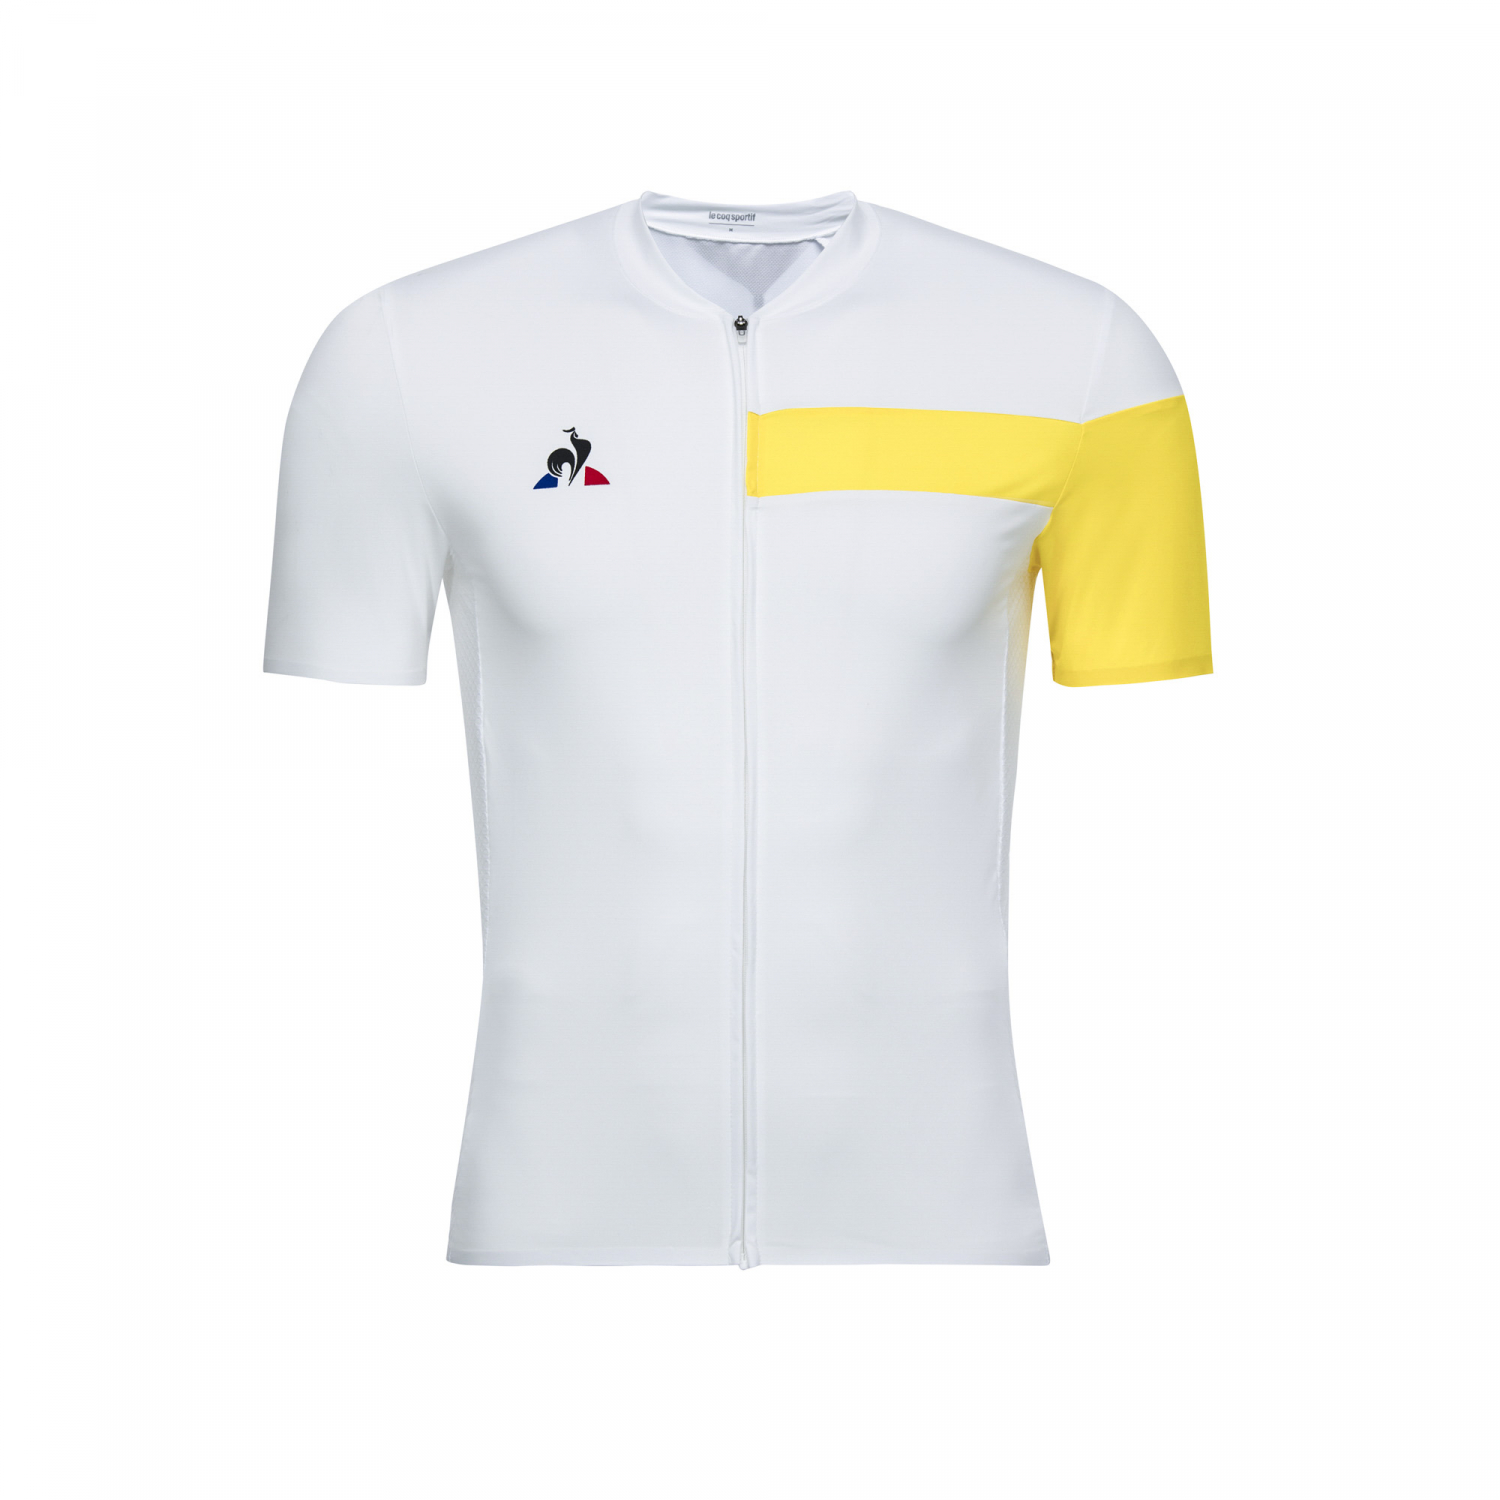 Tour de France Performance White Man Cycling Jersey Official product